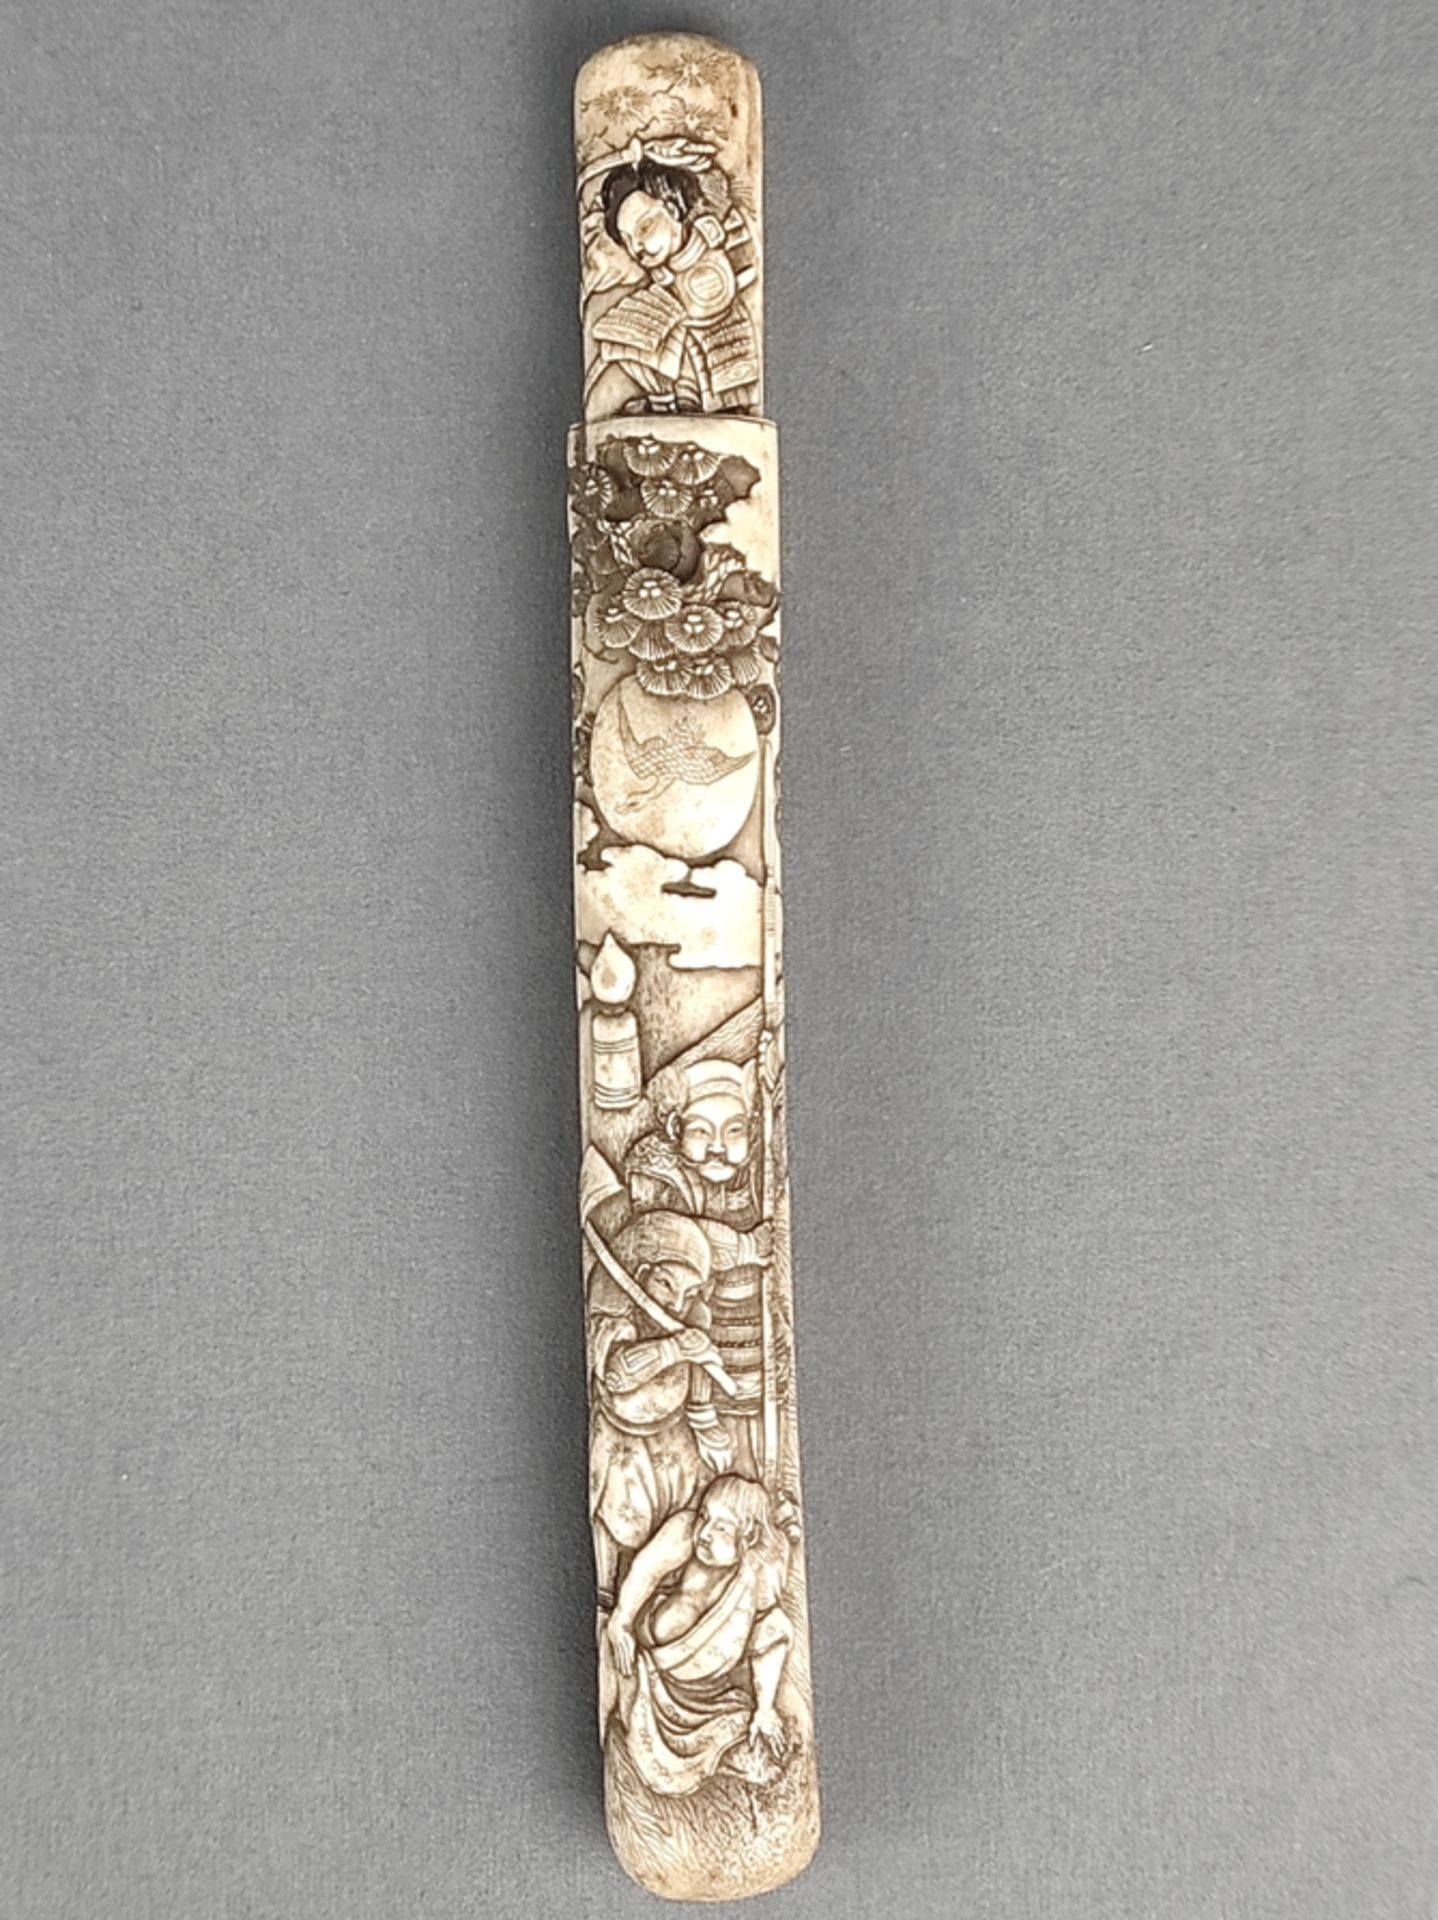 Knife sheath/case, probably Japan, with samurai depictions in relief in front of a landscape, consi